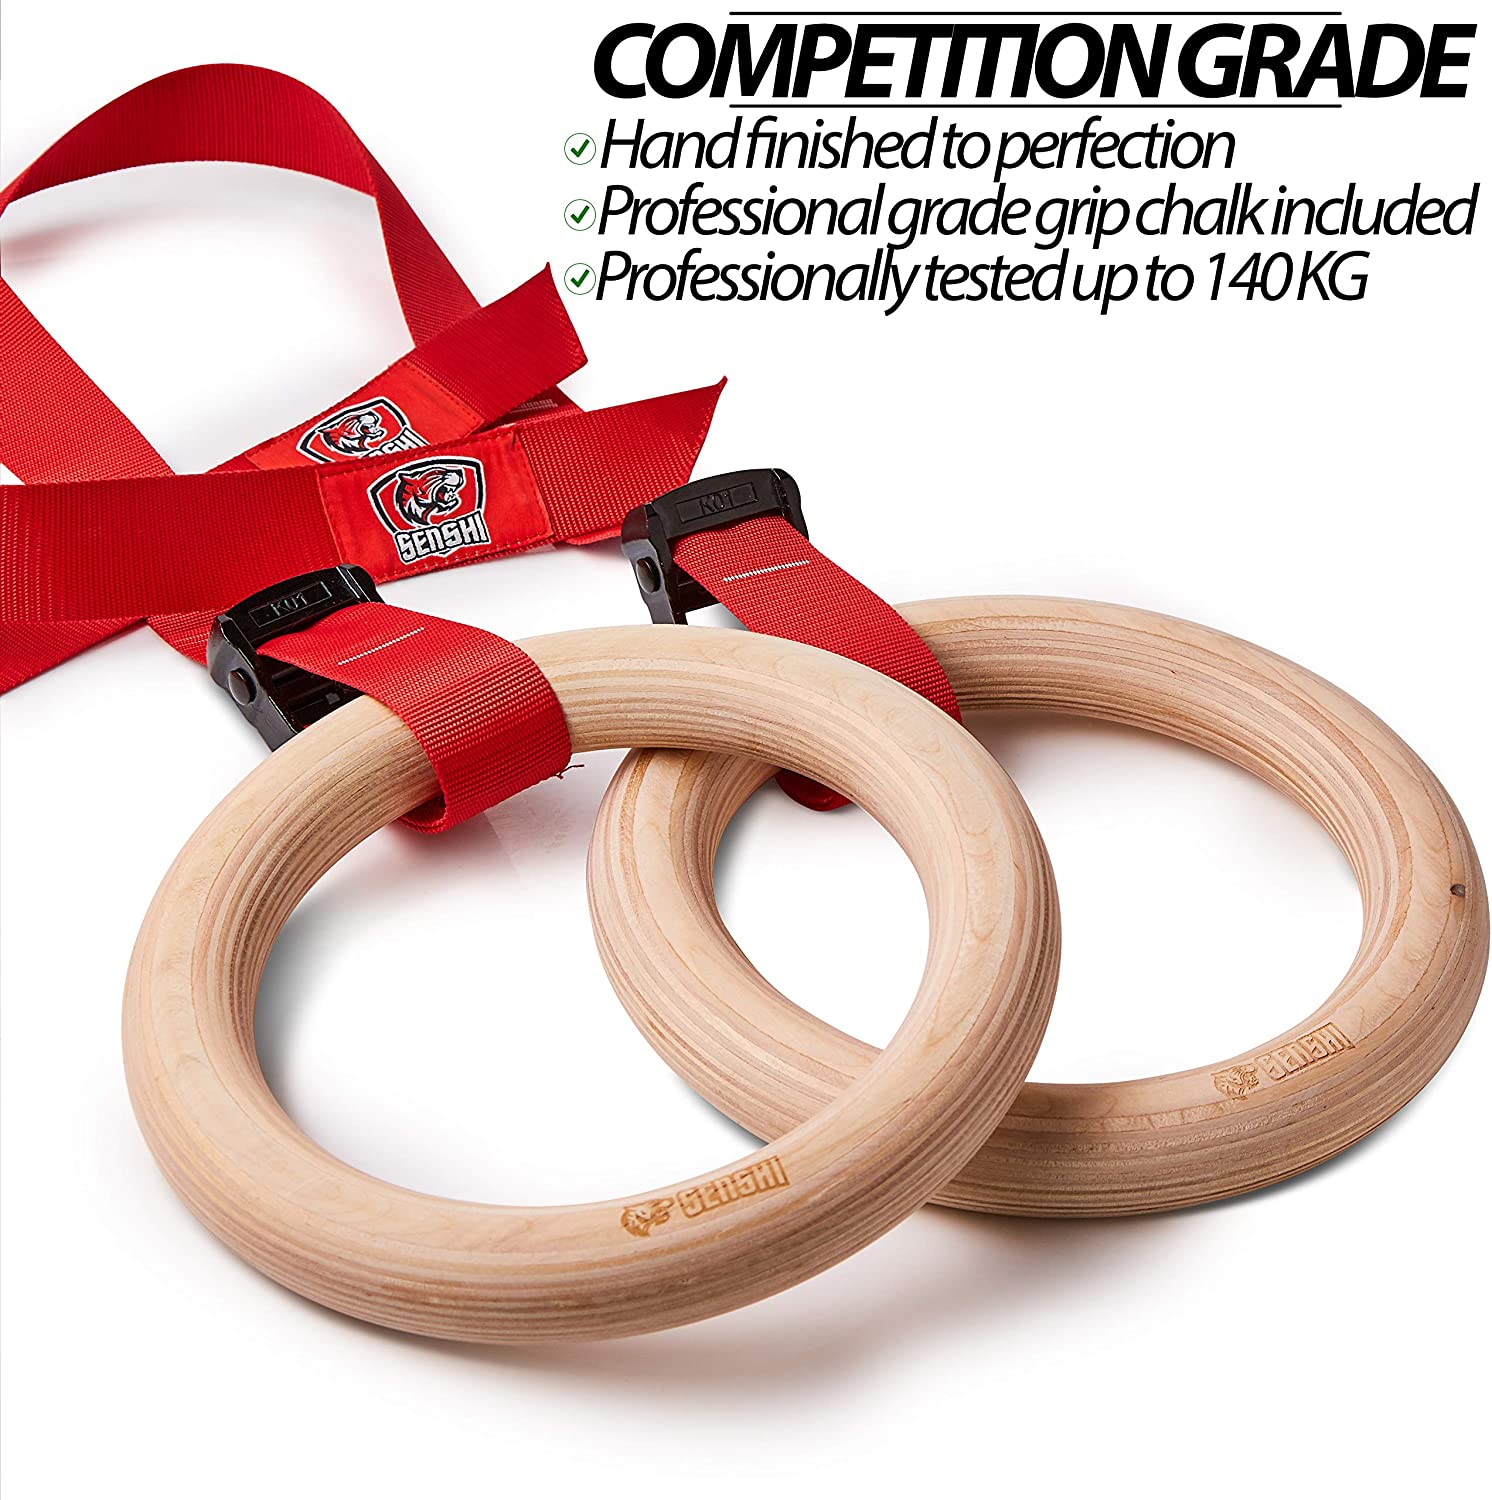 Senshi Japan Wooden Olympic Gymnastic Rings - Includes 